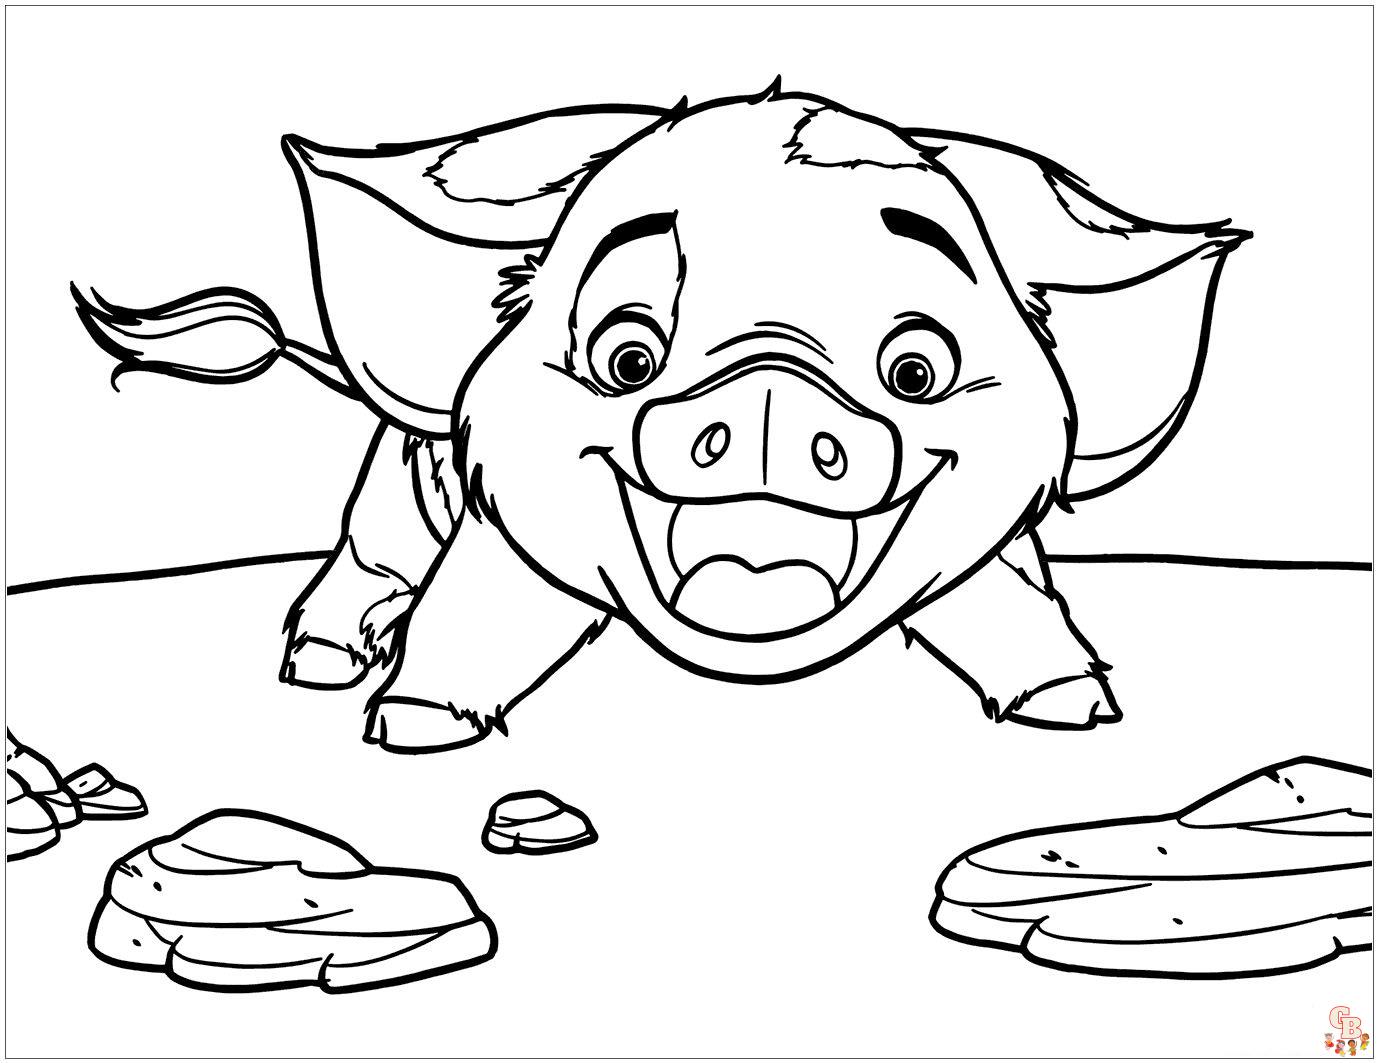 Heihei And Pua coloring pages printable free